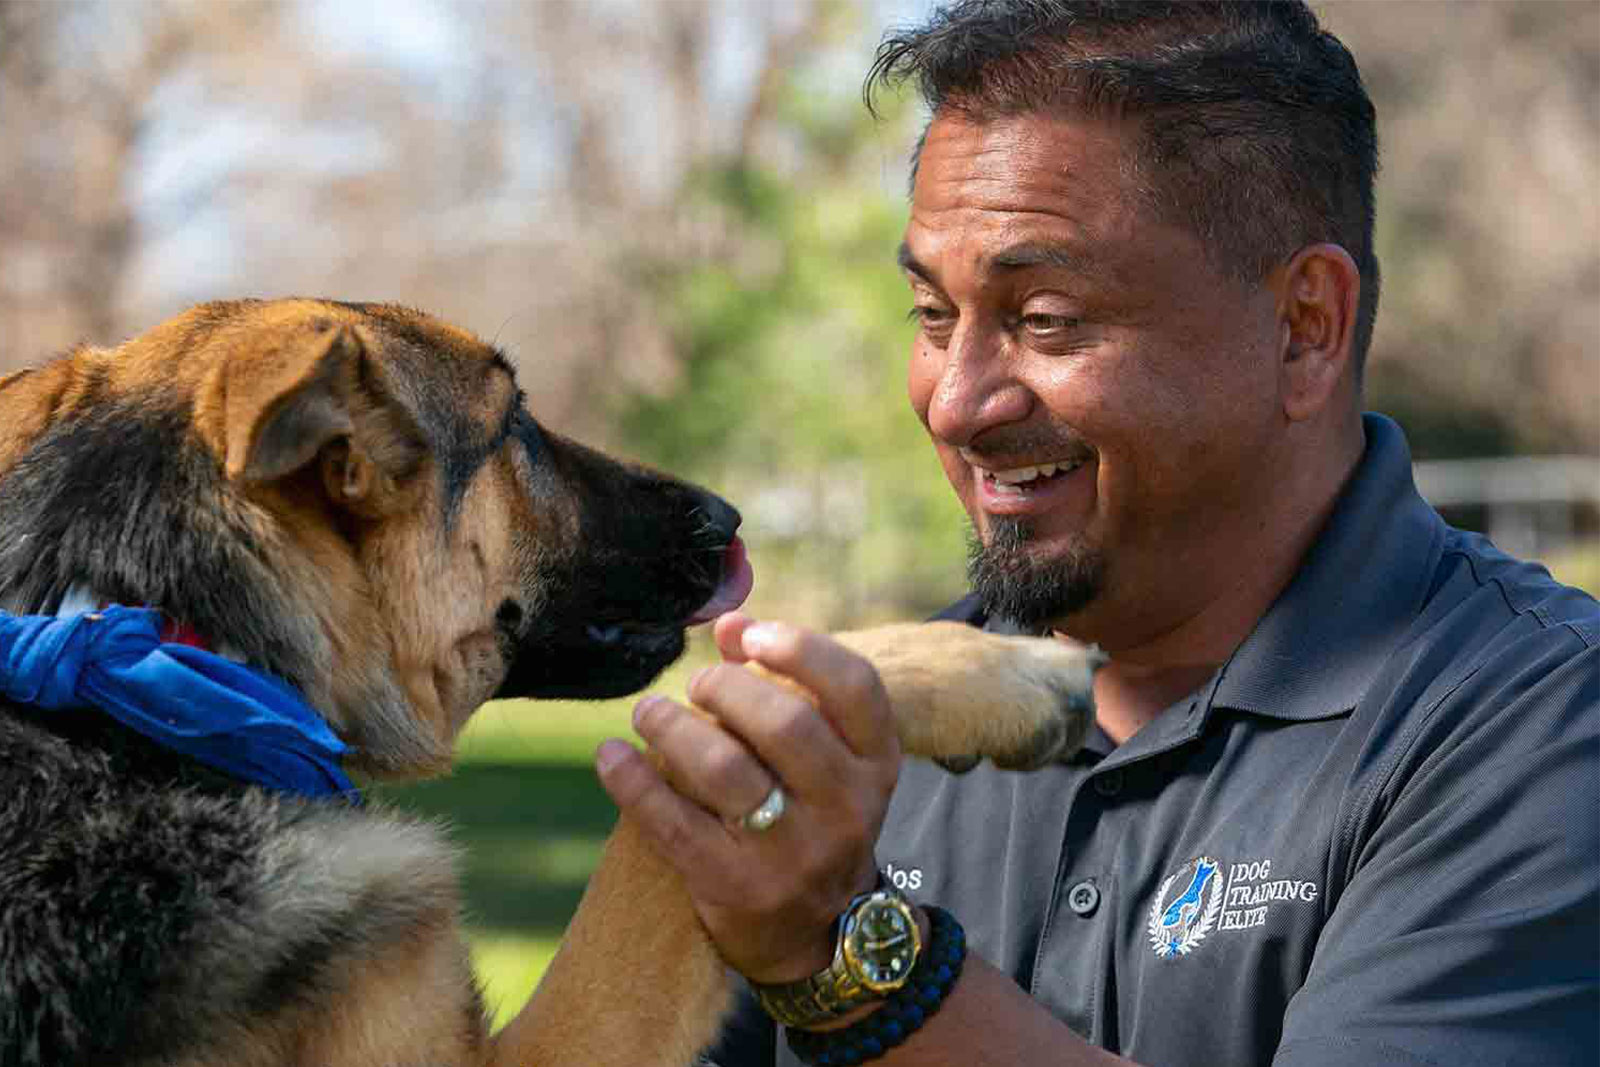 Dog Training Elite is a fun franchise business to invest in and can help you fulfull your career dreams.